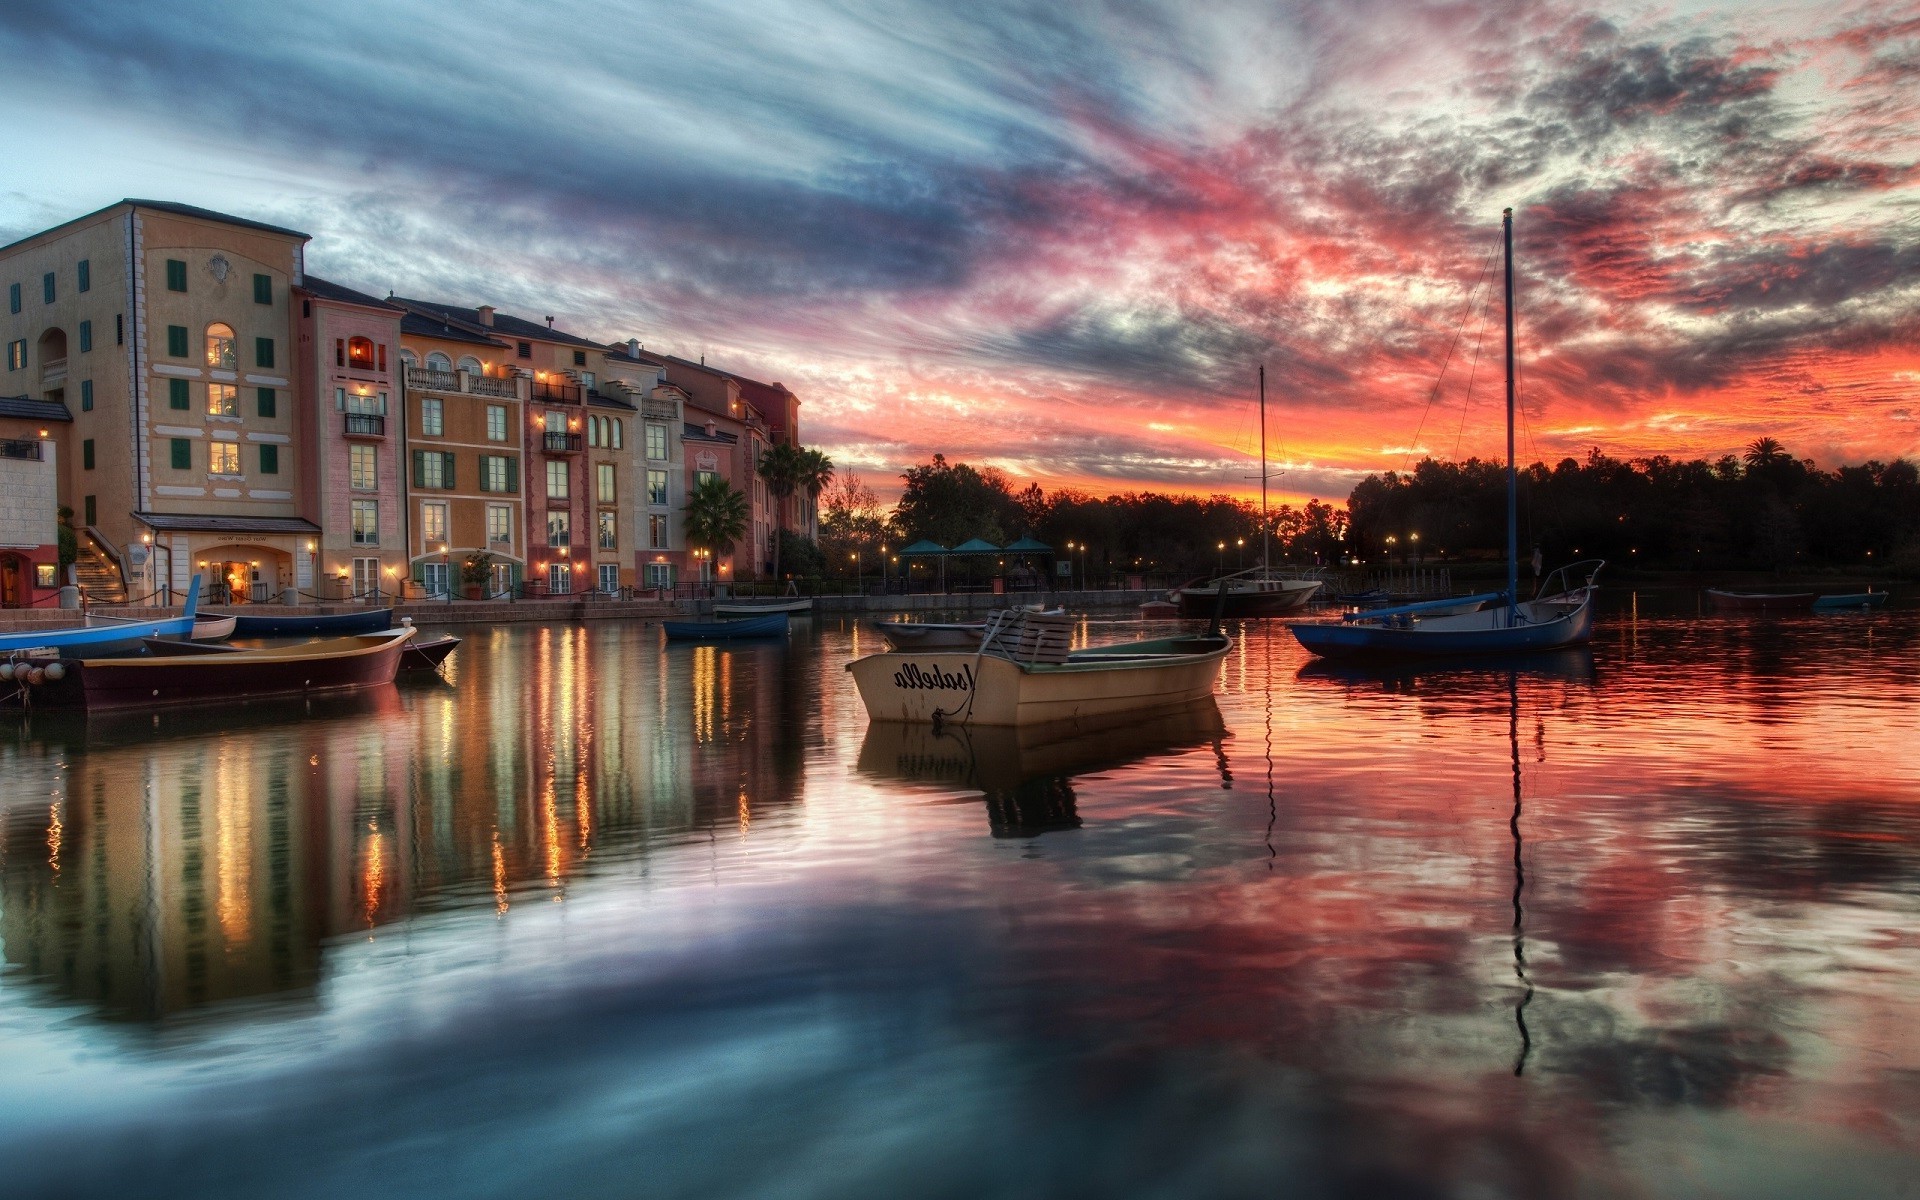 Portofino, Italy, Boat, Sea, Water, Reflection, Sunset, Clouds, Building, City Wallpaper